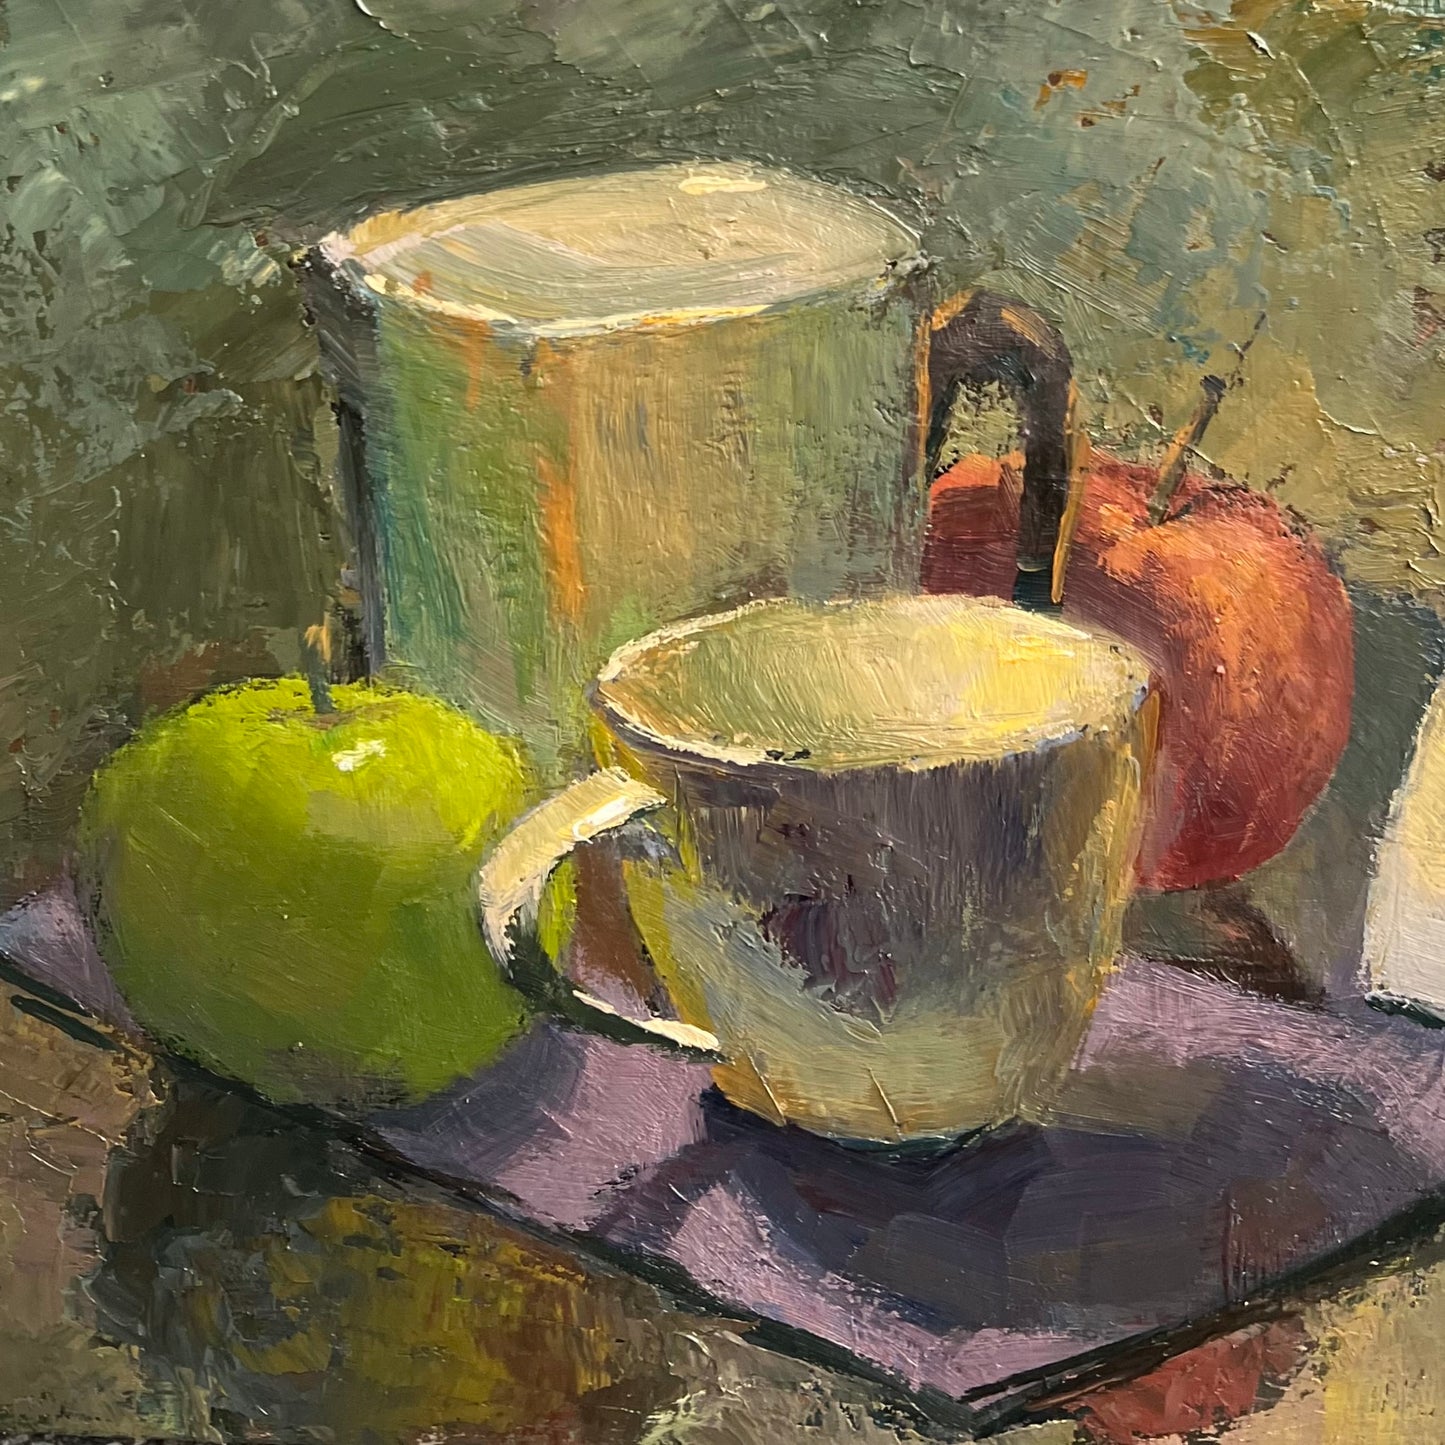 Apples and Cups - Original Still Life Oil Painting